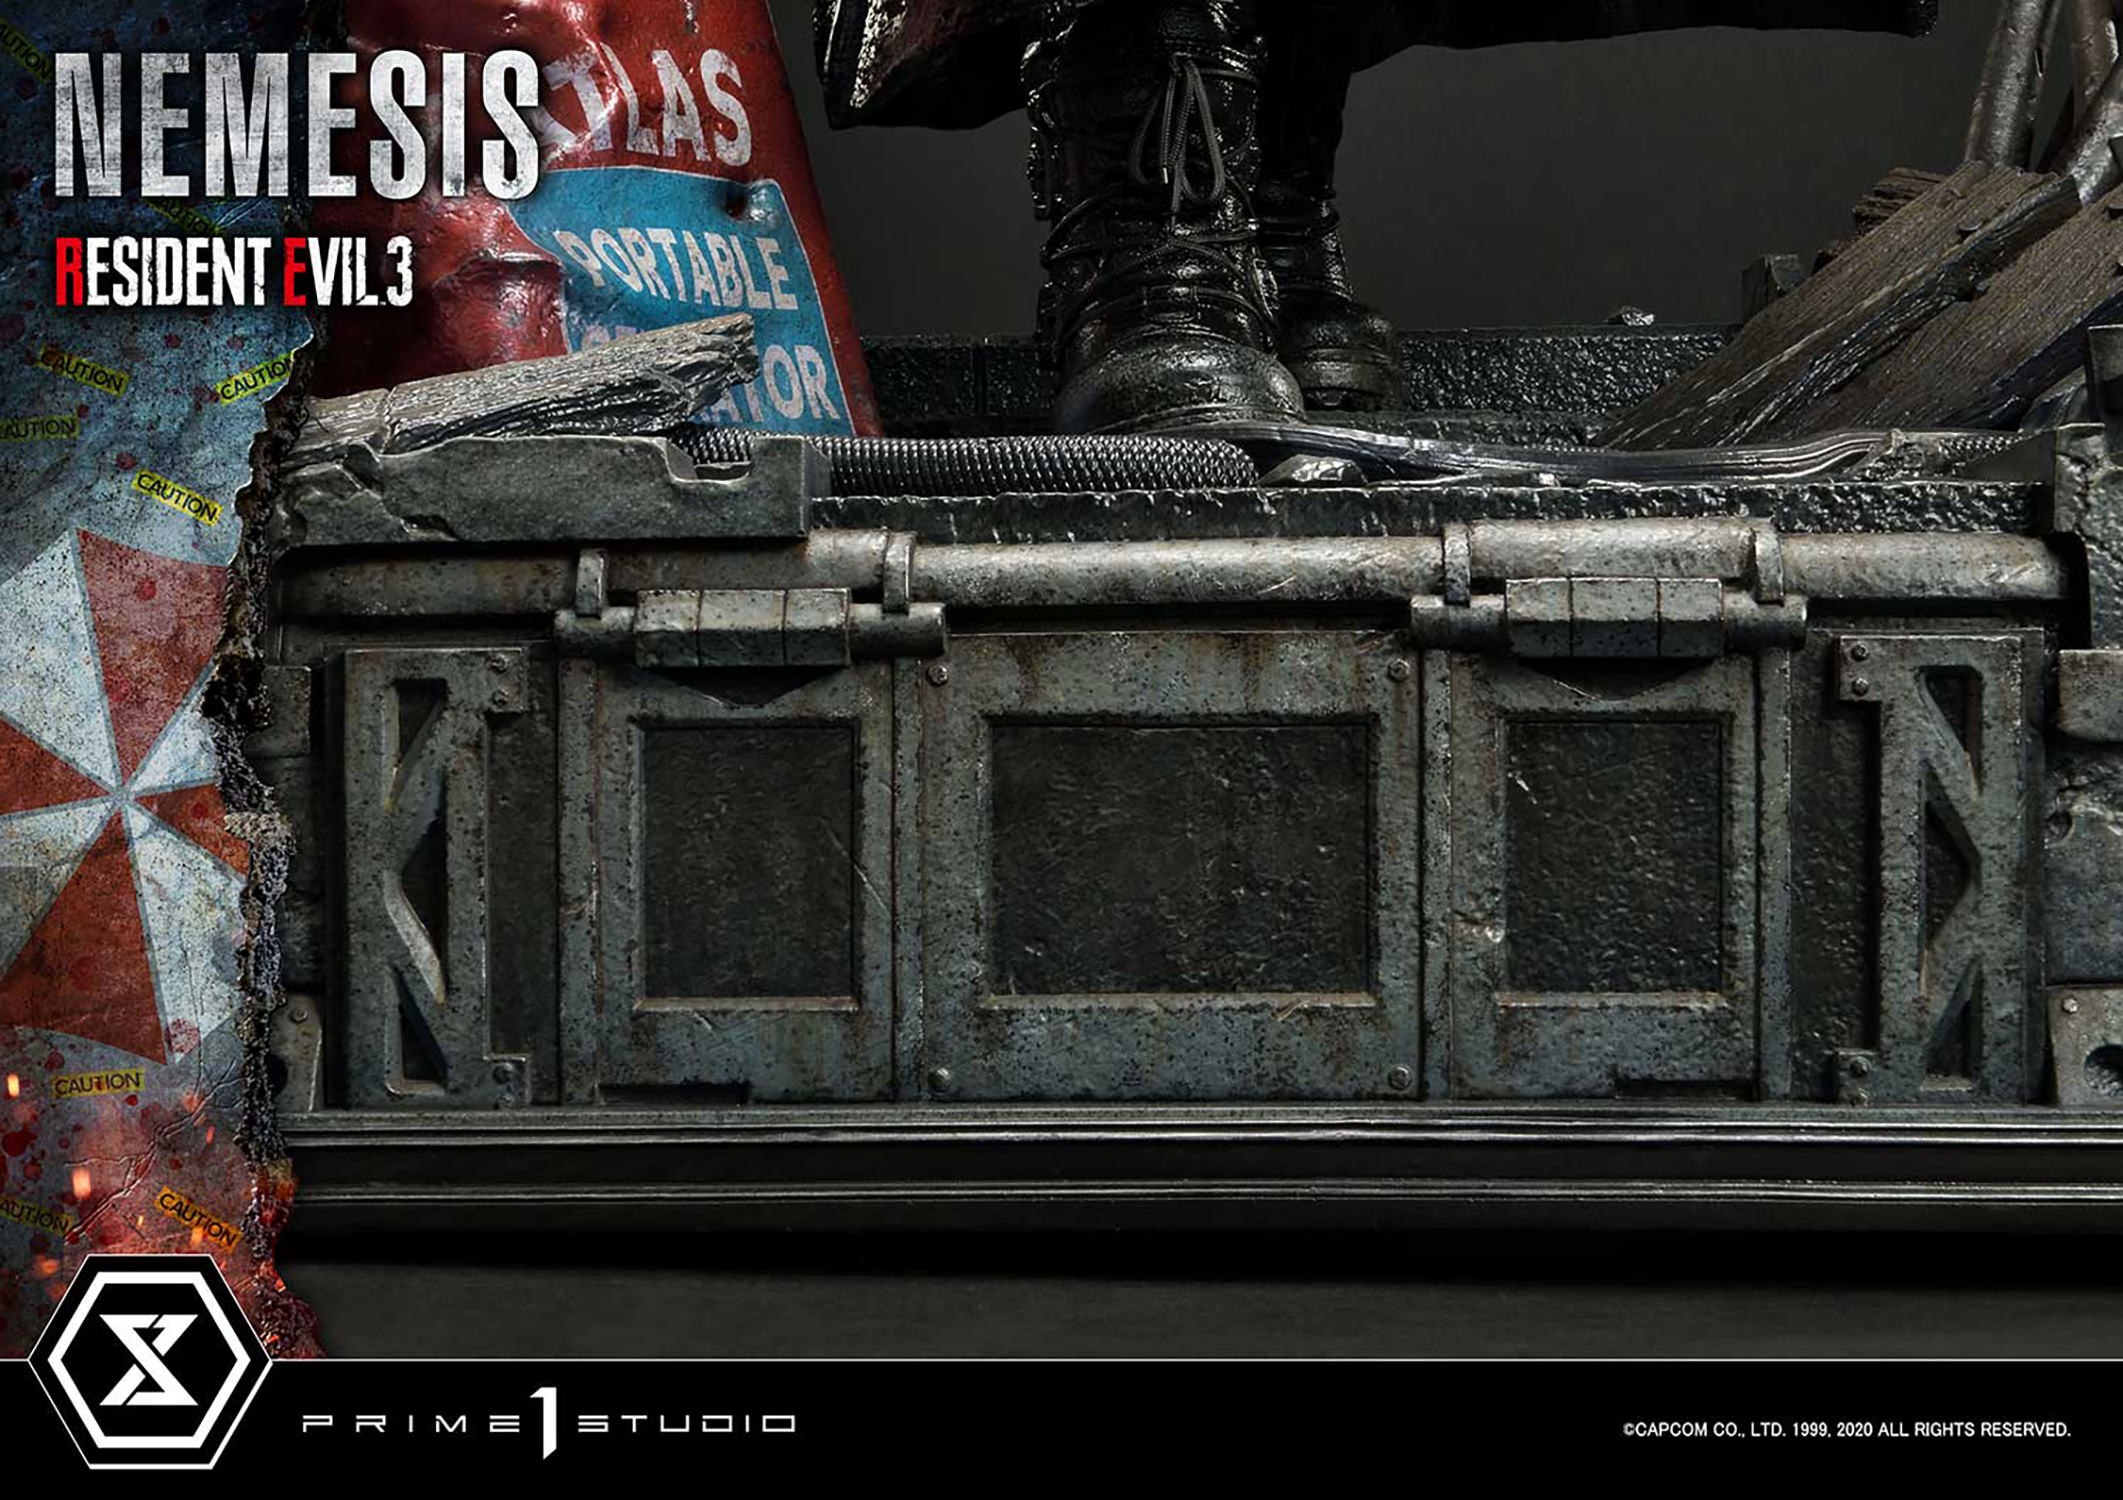 Nemesis Collector Edition (Prototype Shown) View 66